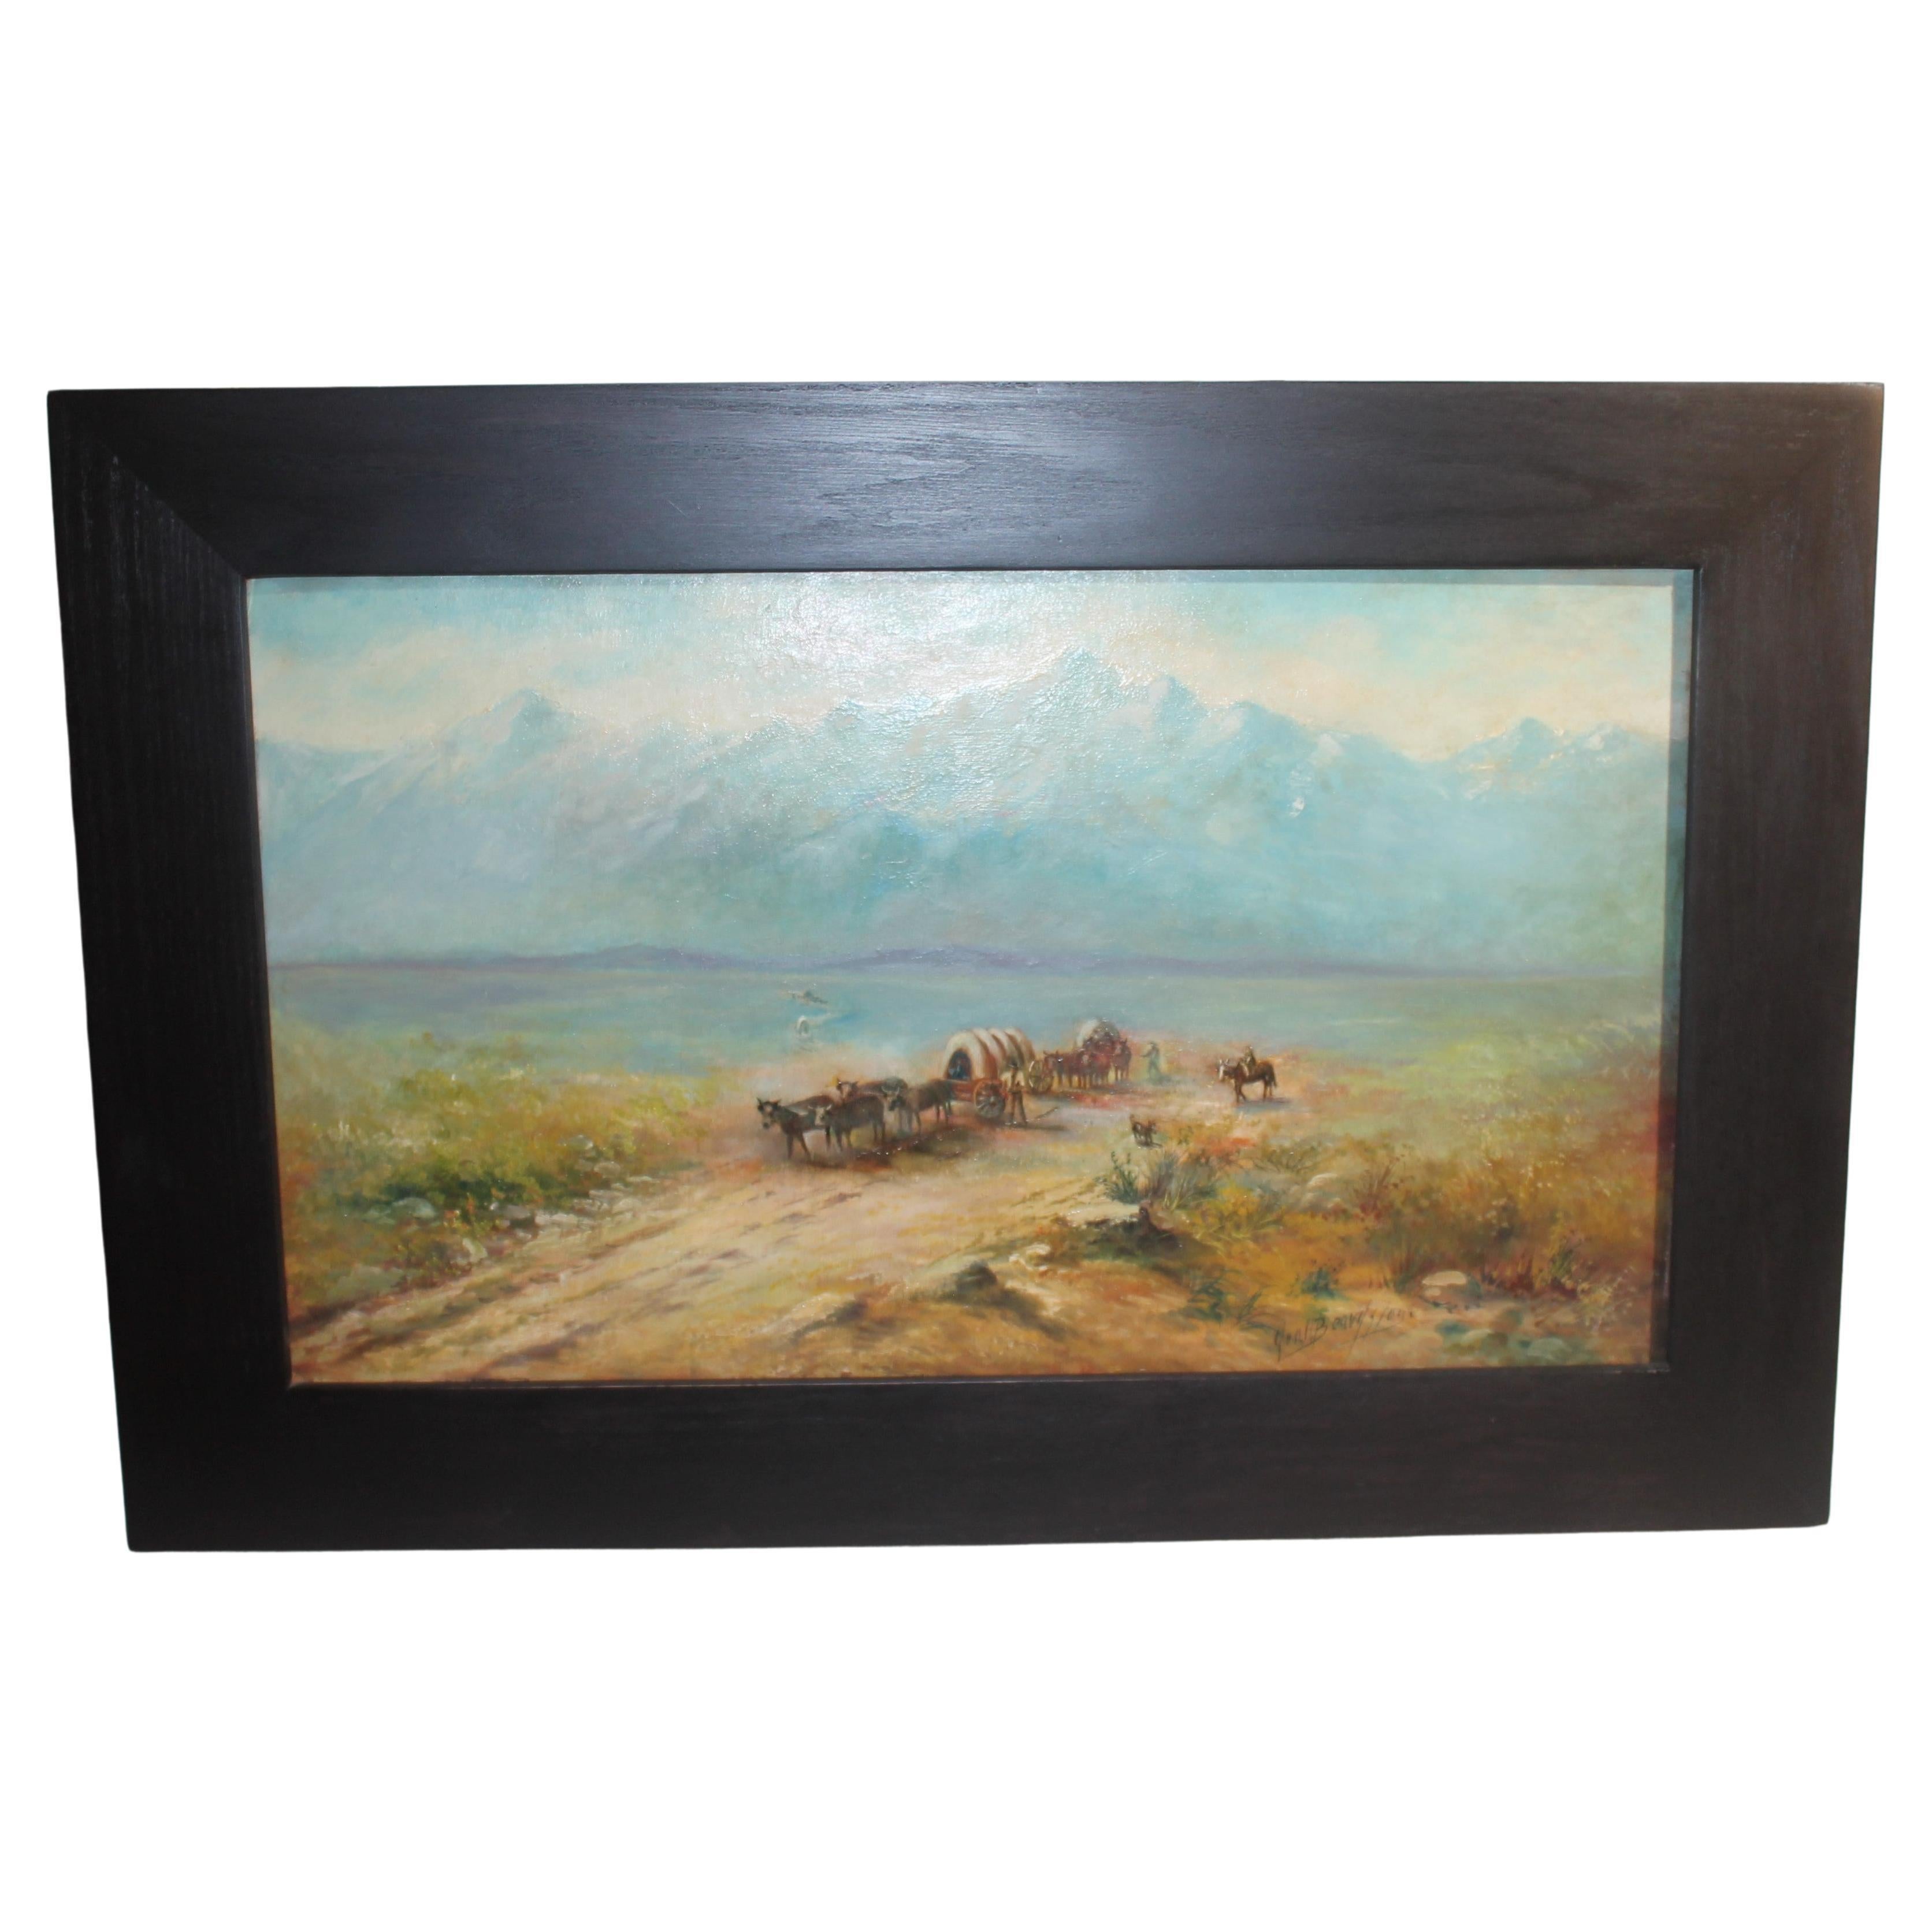 19thc oil painting on Board Wagon Train on Dusty Trail. Great Scenery of the difficulties of a life left in the past when manual labor and travel was based on the simplicity's of human technology. The artist name is illegible.